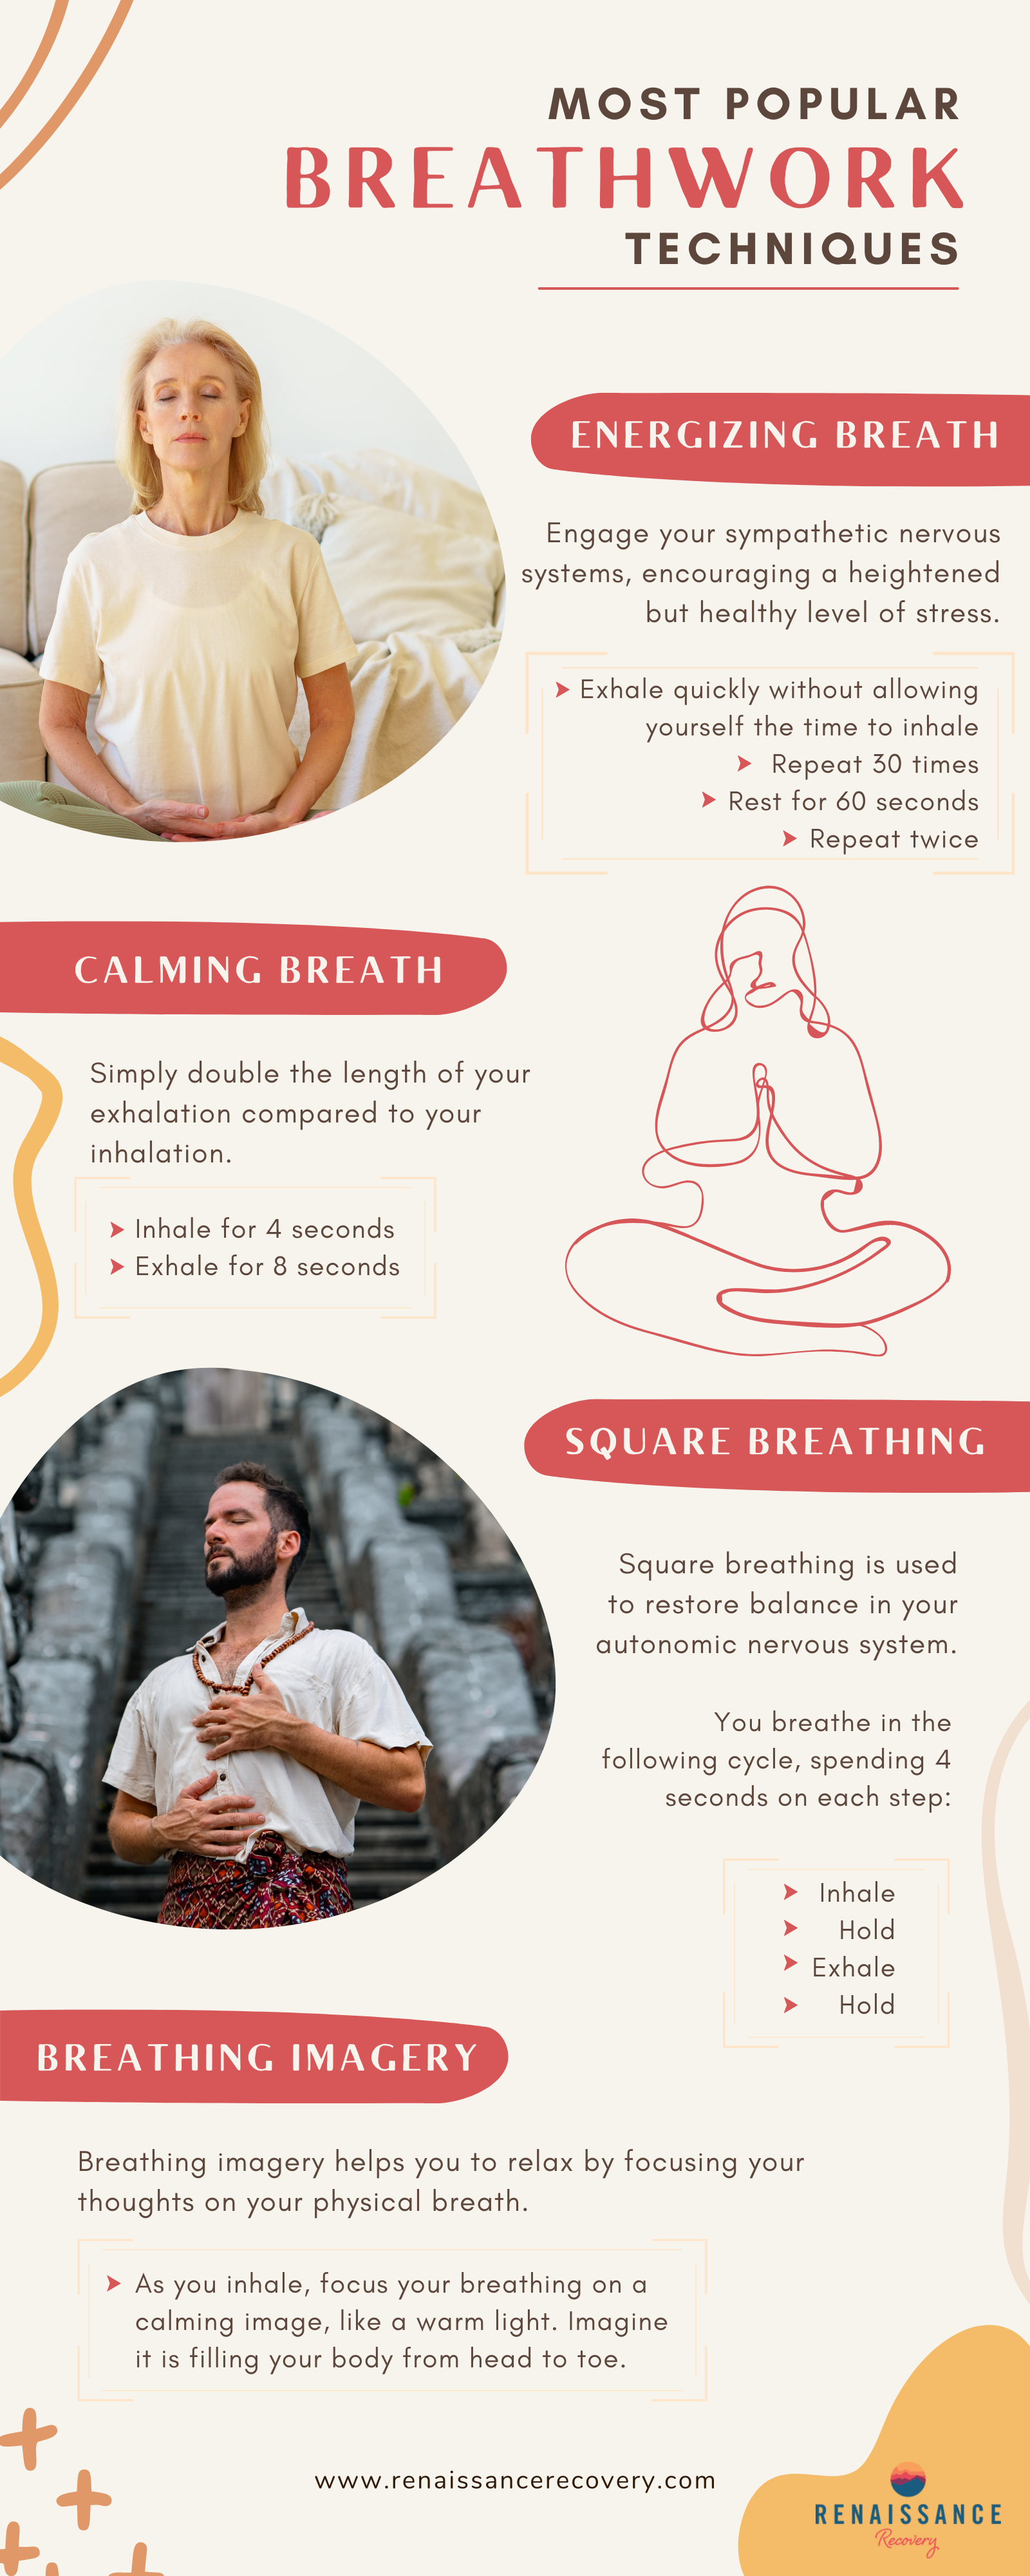 An infographic on common breathwork techniques